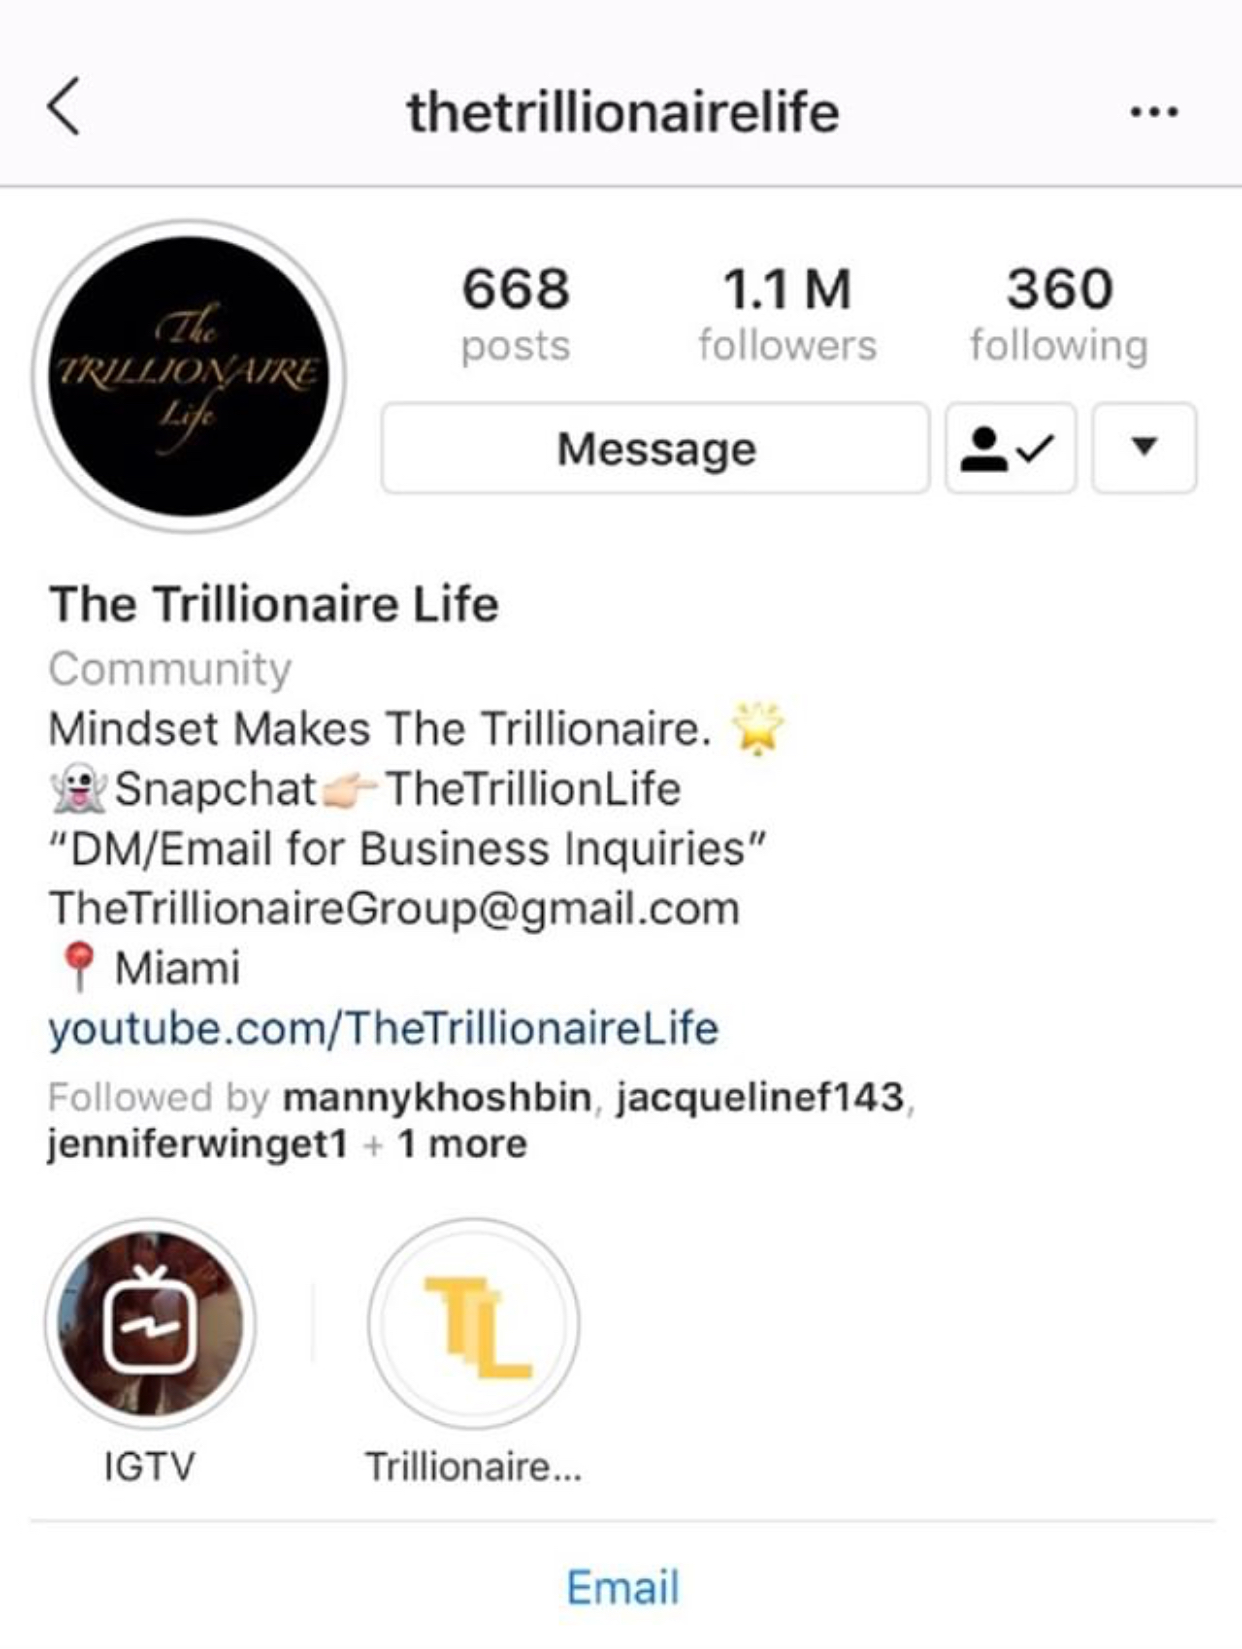  - how to get 1 million followers on instagram